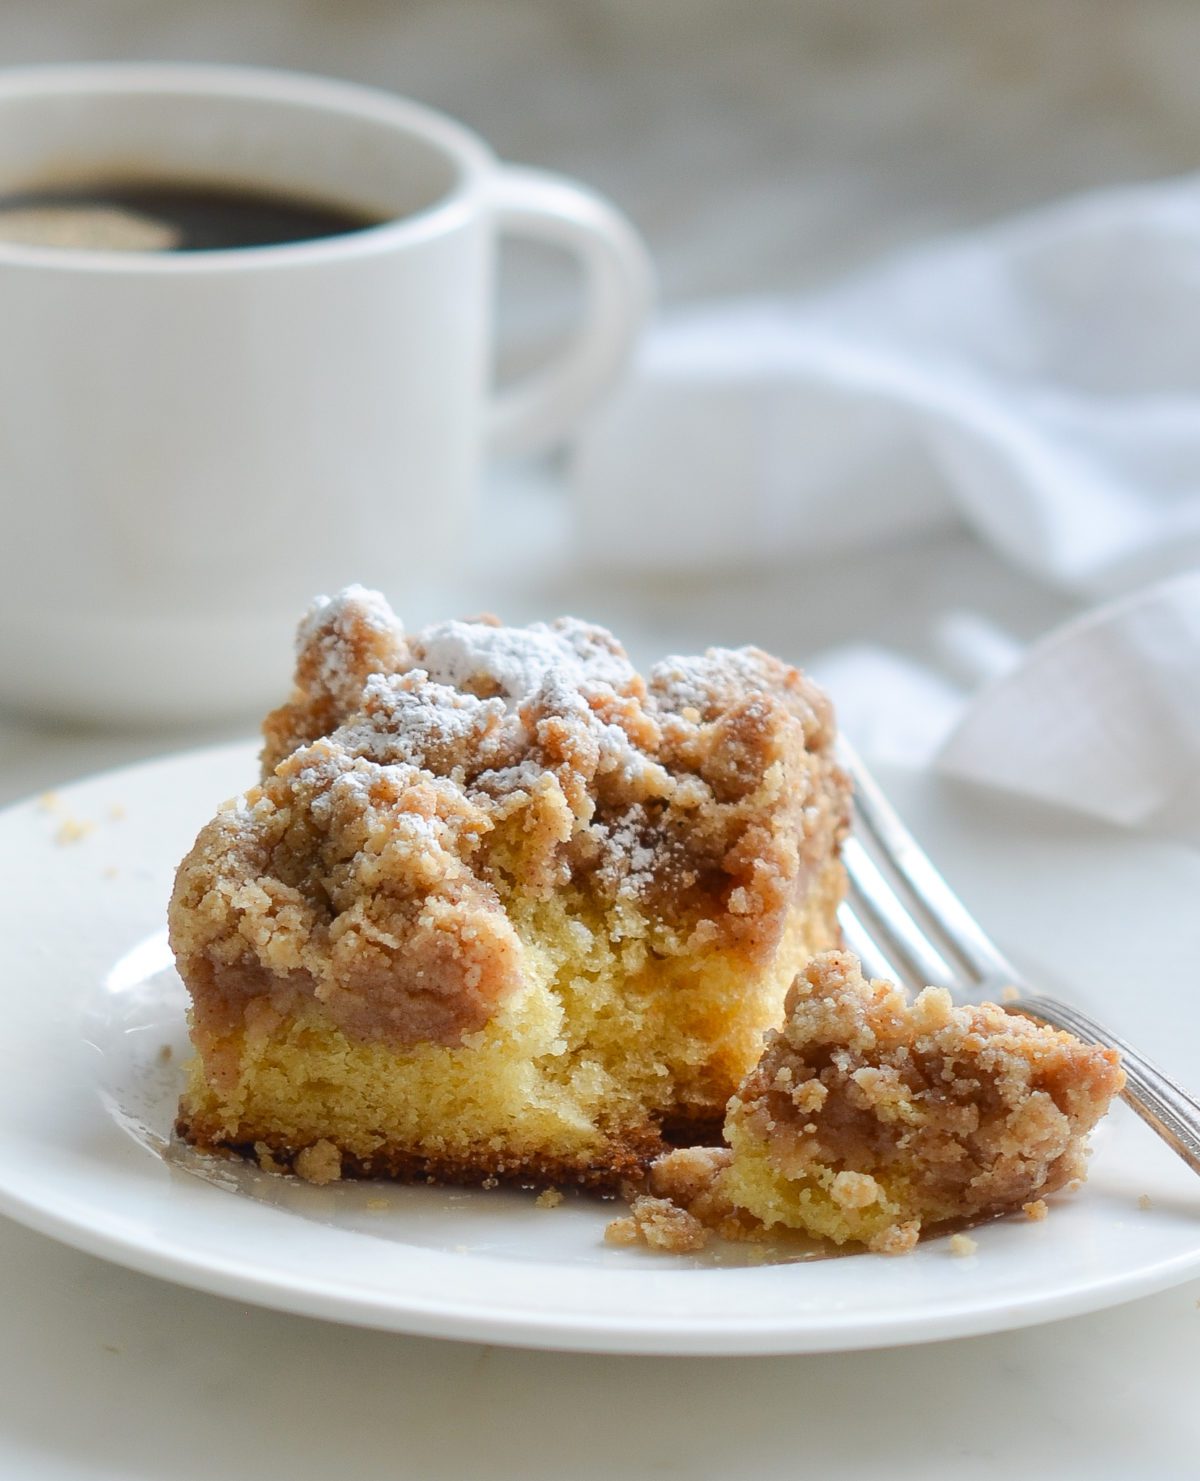 Share more than 101 apple pie crumb cake super hot - awesomeenglish.edu.vn